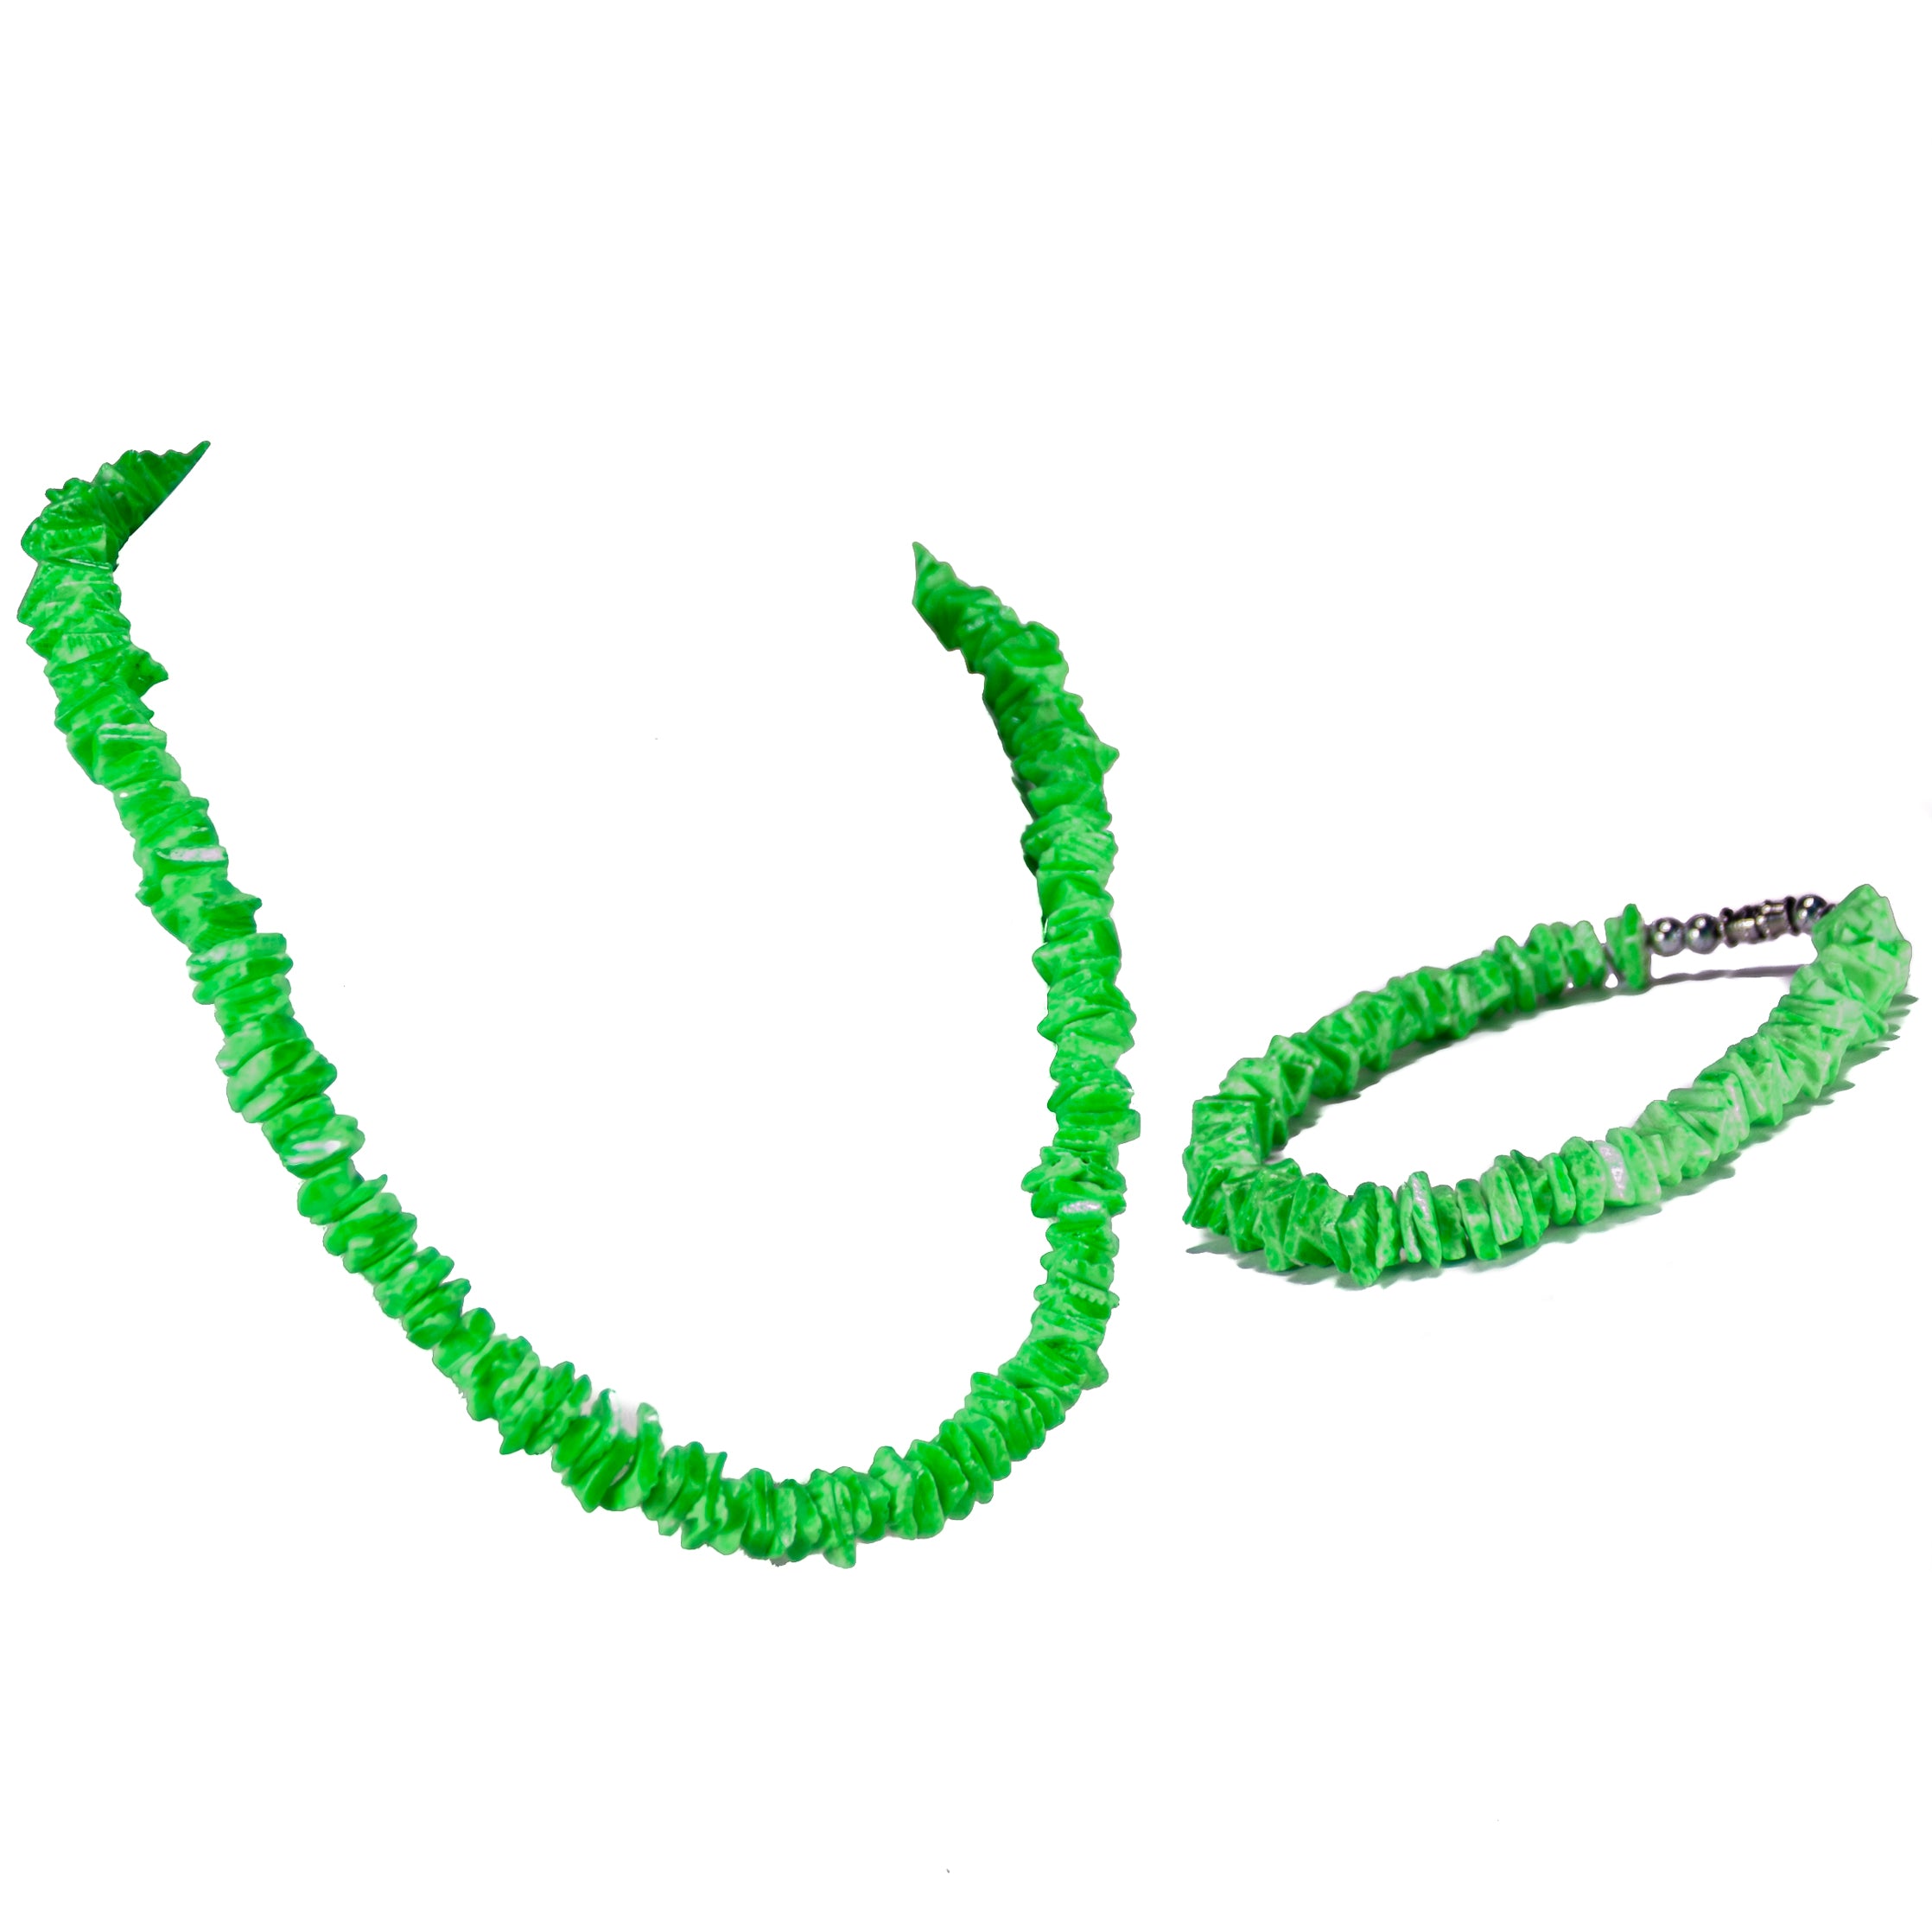 Neon Green Puka Chip Shell Beads Necklace and Anklet Set